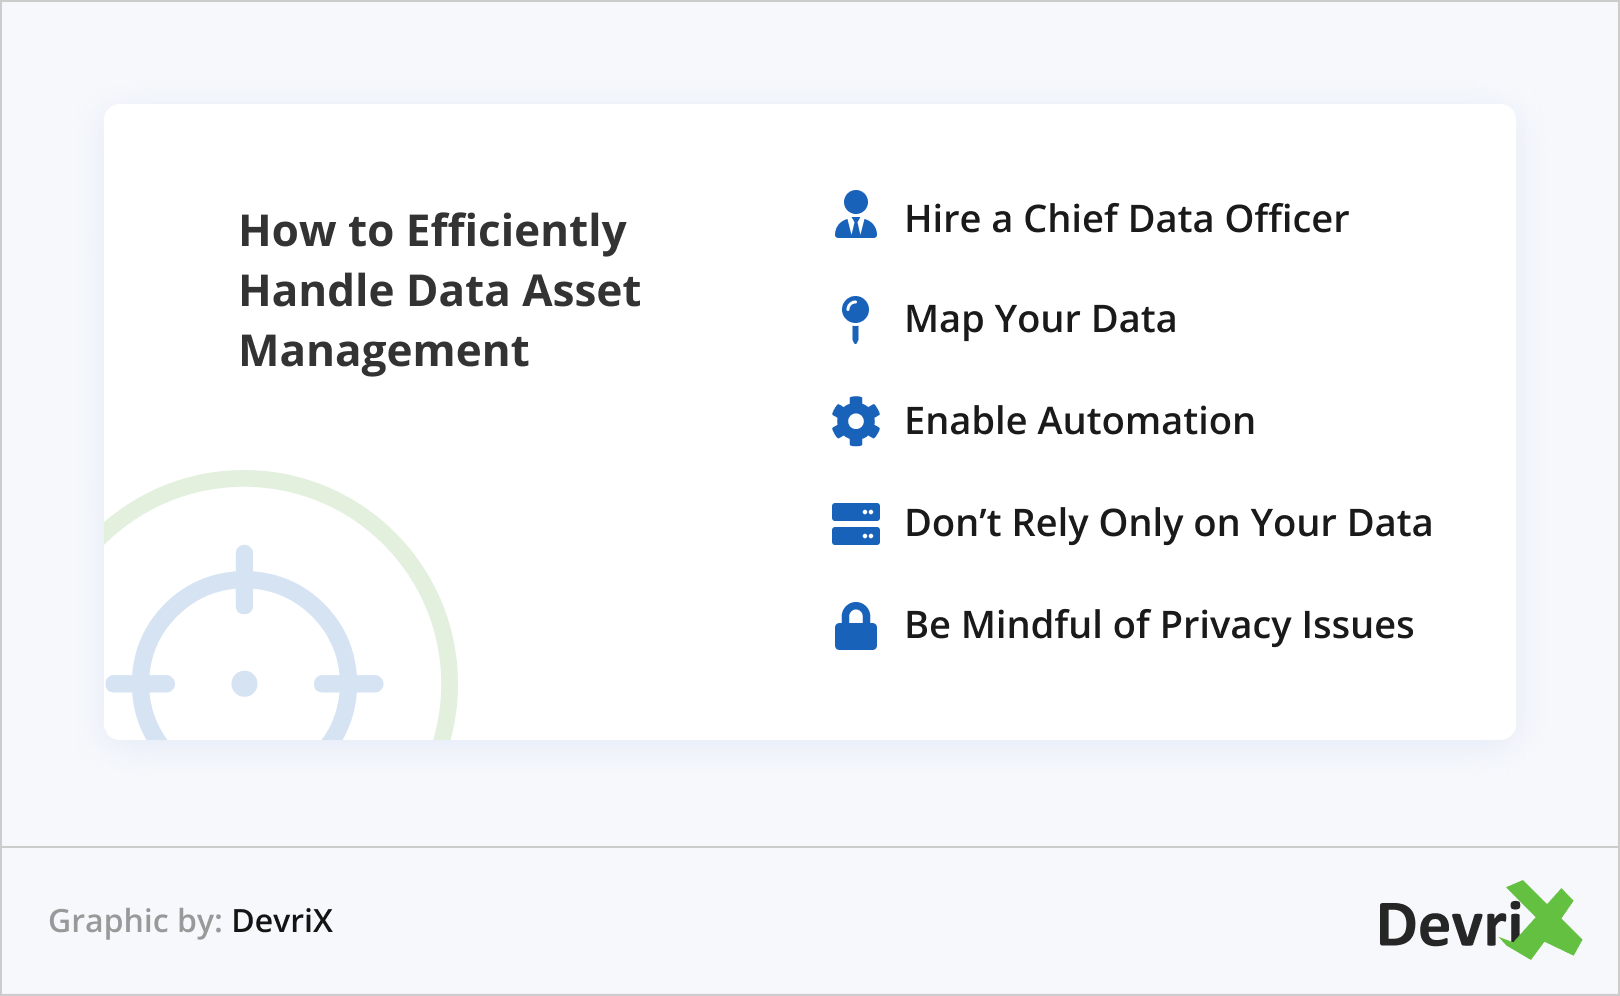 How to Efficiently Handle Data Asset Management